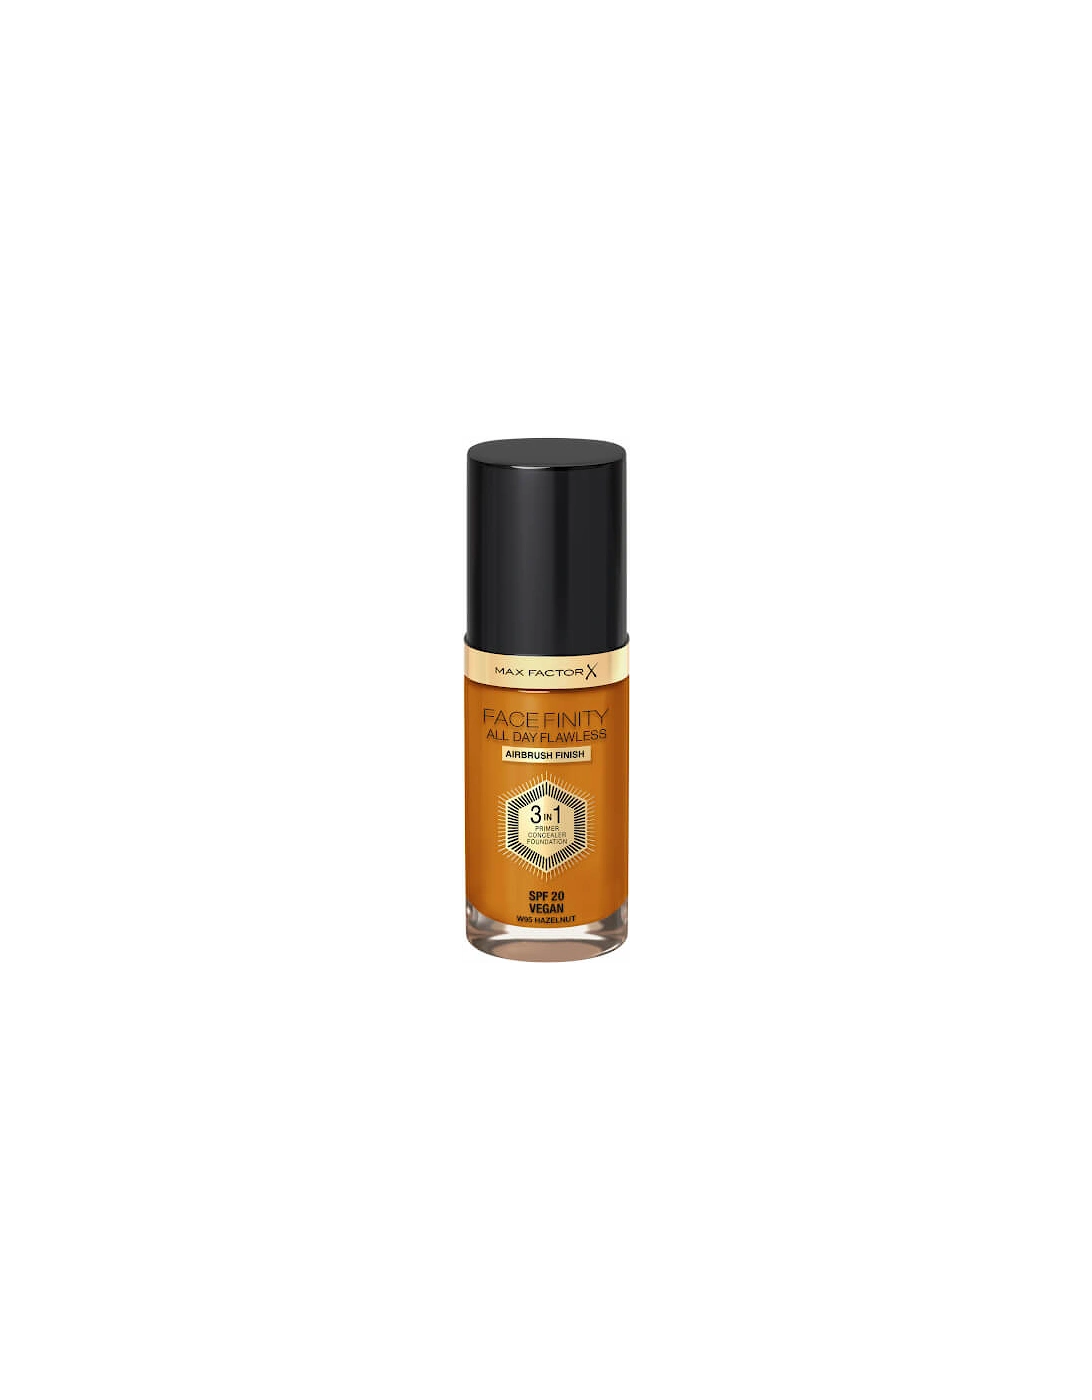 Facefinity All Day Flawless Foundation - Tawny, 2 of 1